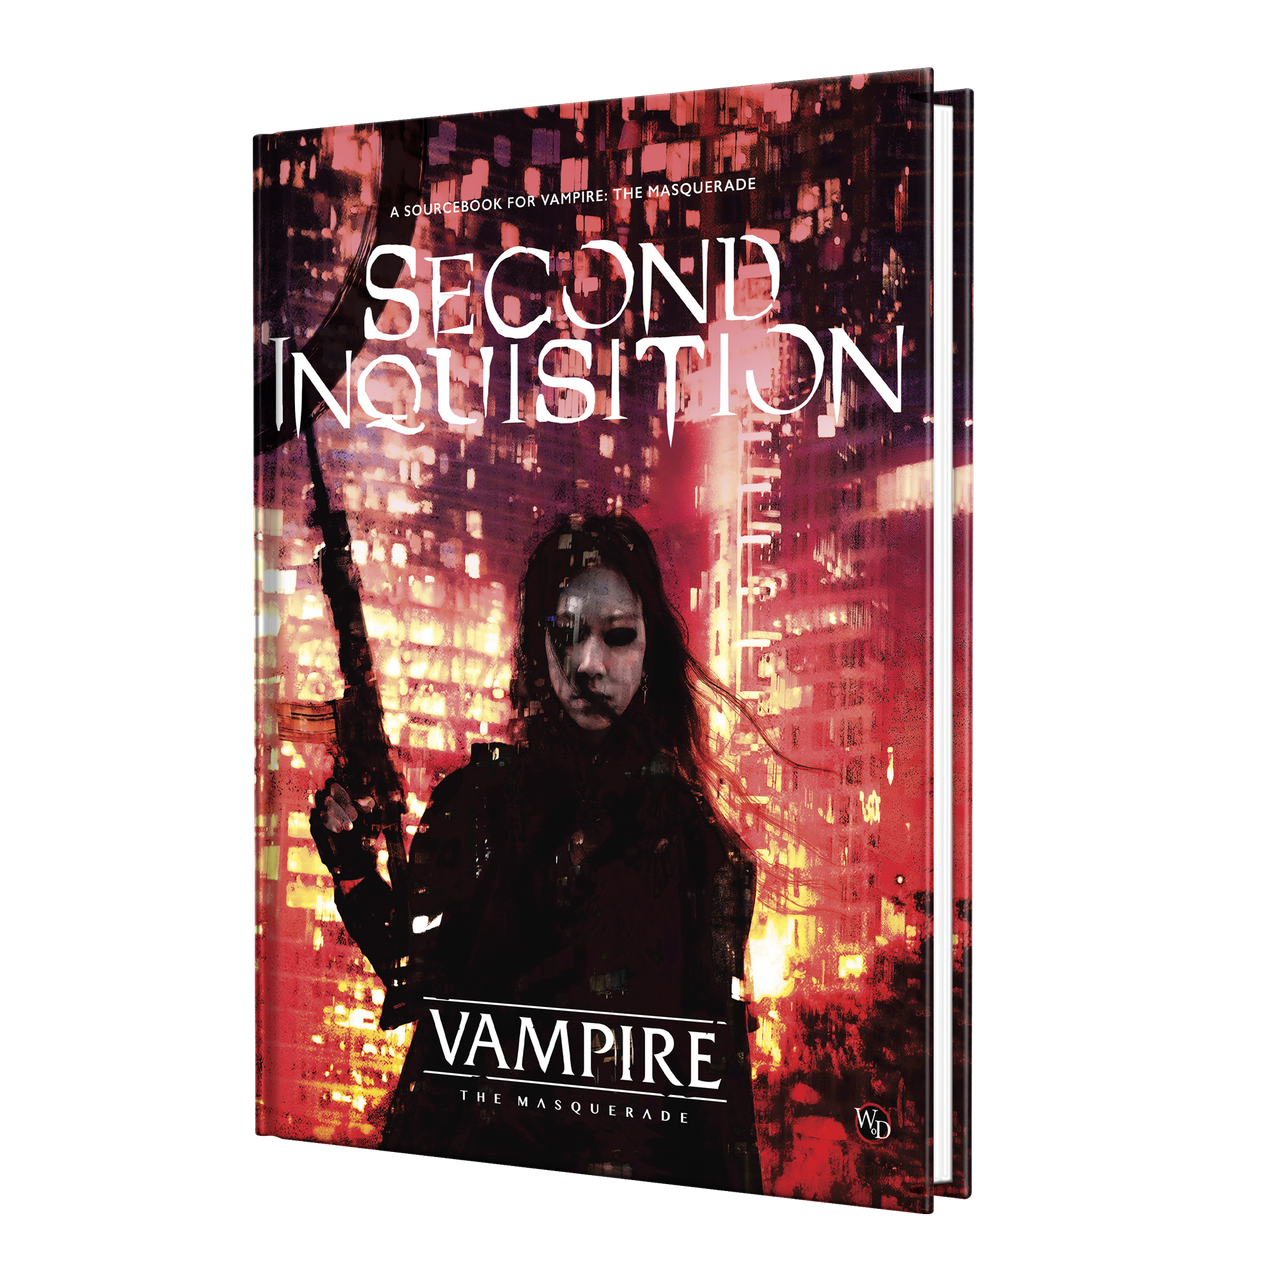 Vampire: The Masquerade, 5th edition 2nd Inquisition Source Book